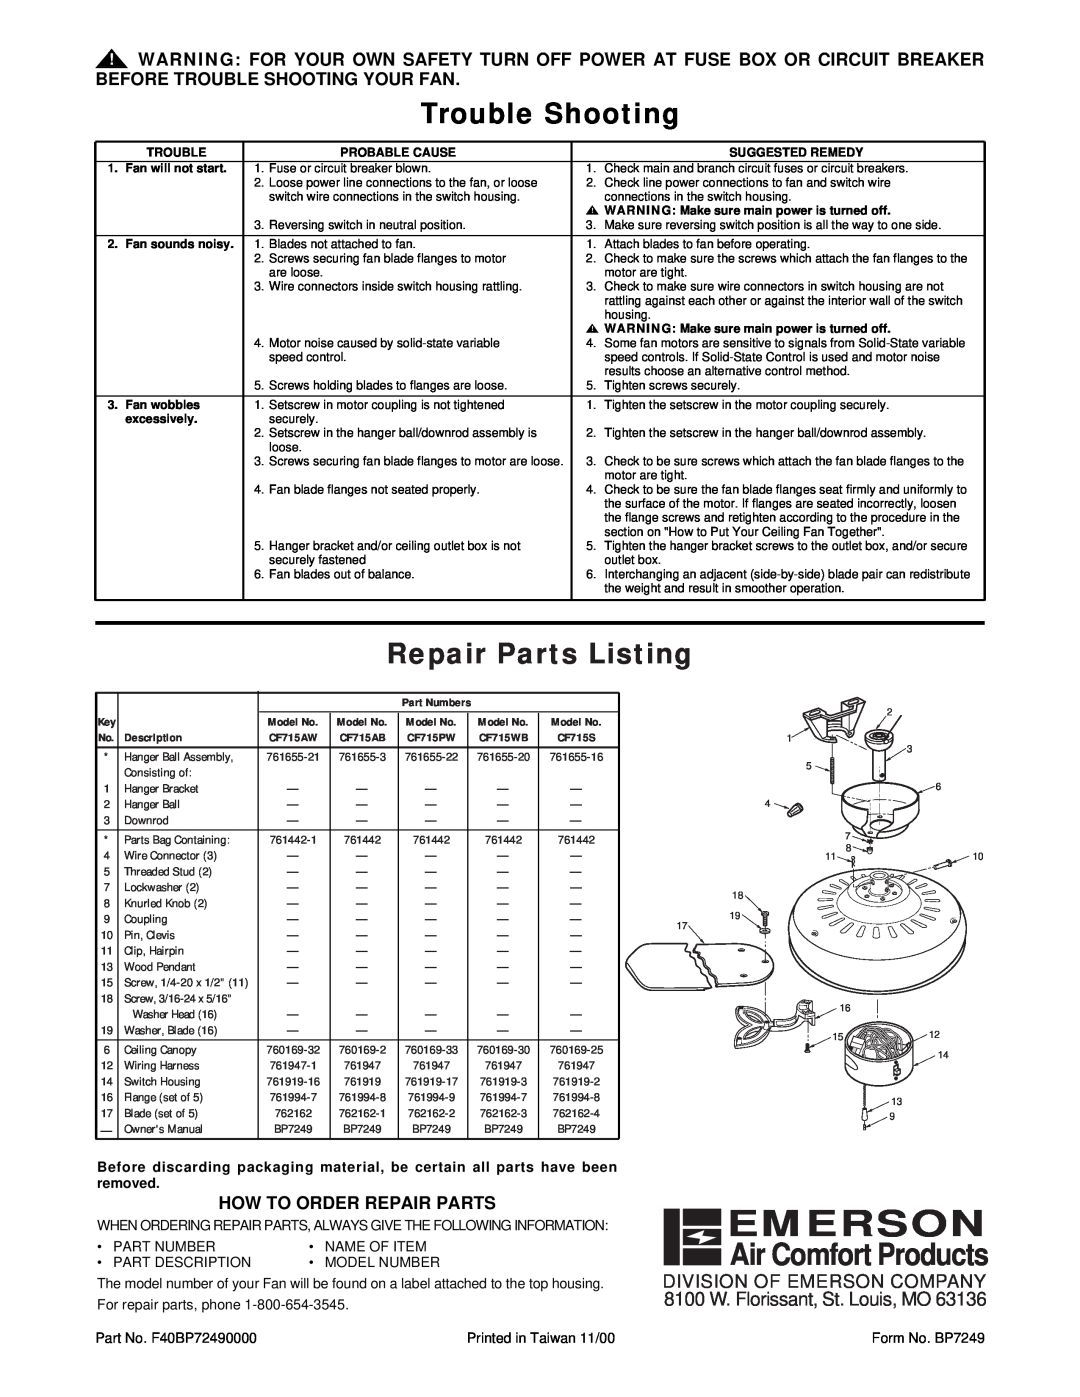 Emerson CF715AB00, CF715WB00 Trouble Shooting, Repair Parts Listing, Air Comfort Products, Division Of Emerson Company 